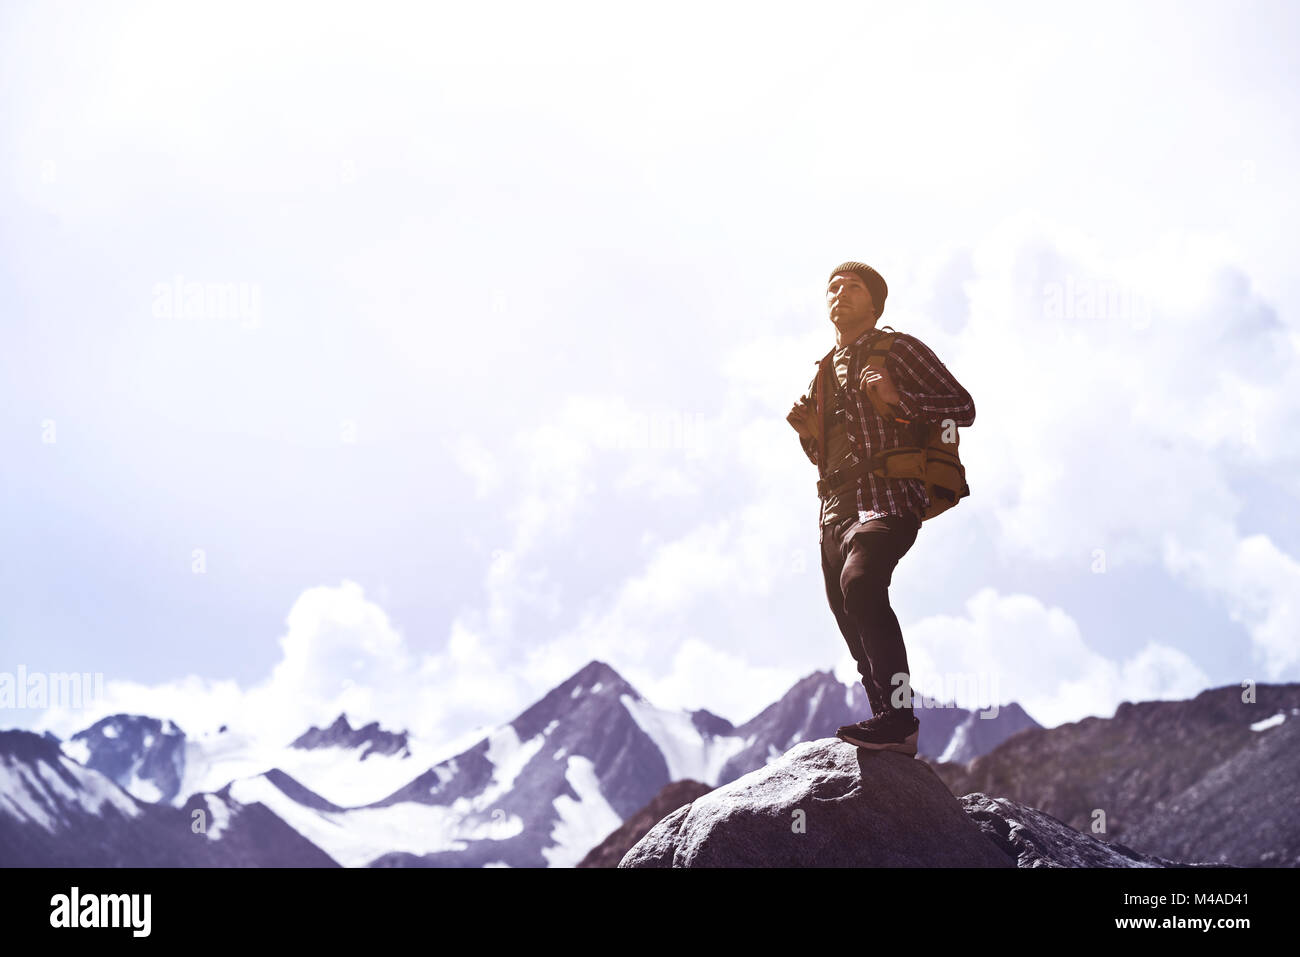 Travel adventure or trekkinng concept with single man against mountains Stock Photo